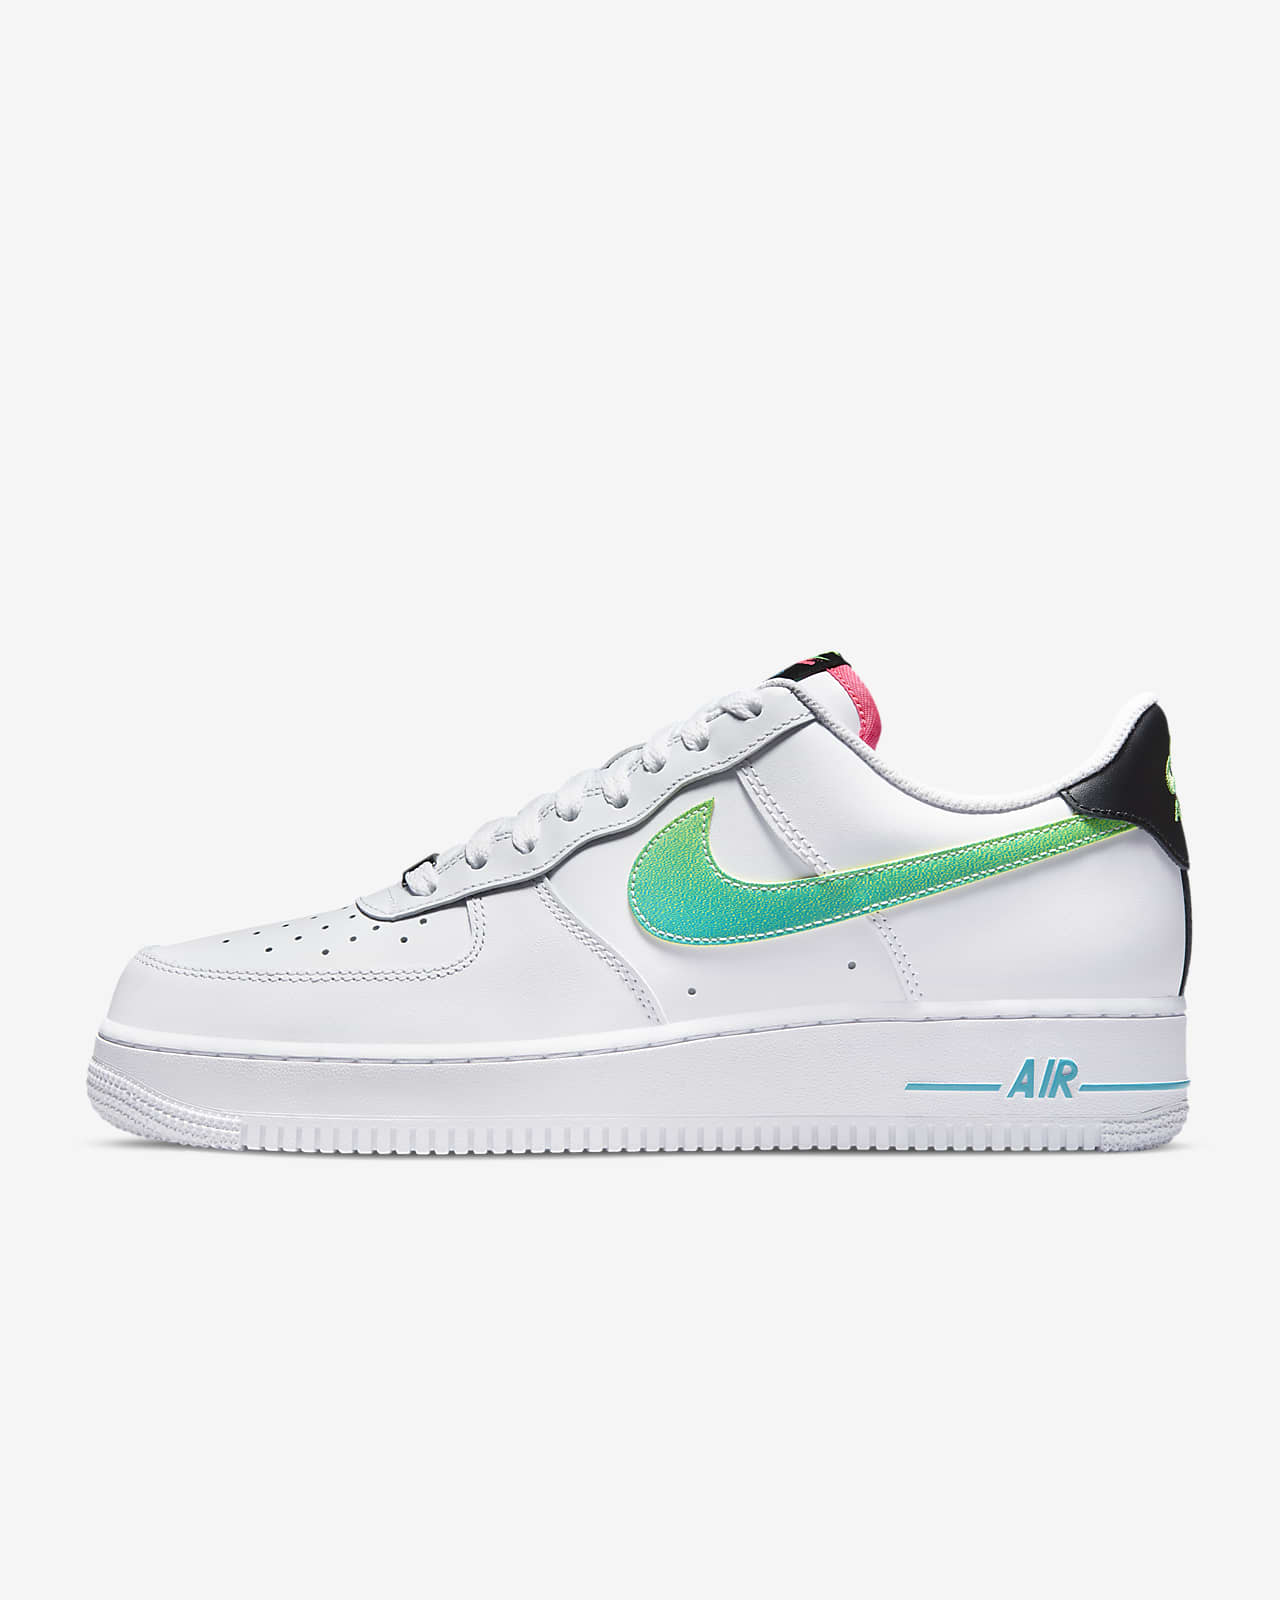 Nike Air Force 1 ’07 LV8 ‘Radiance’